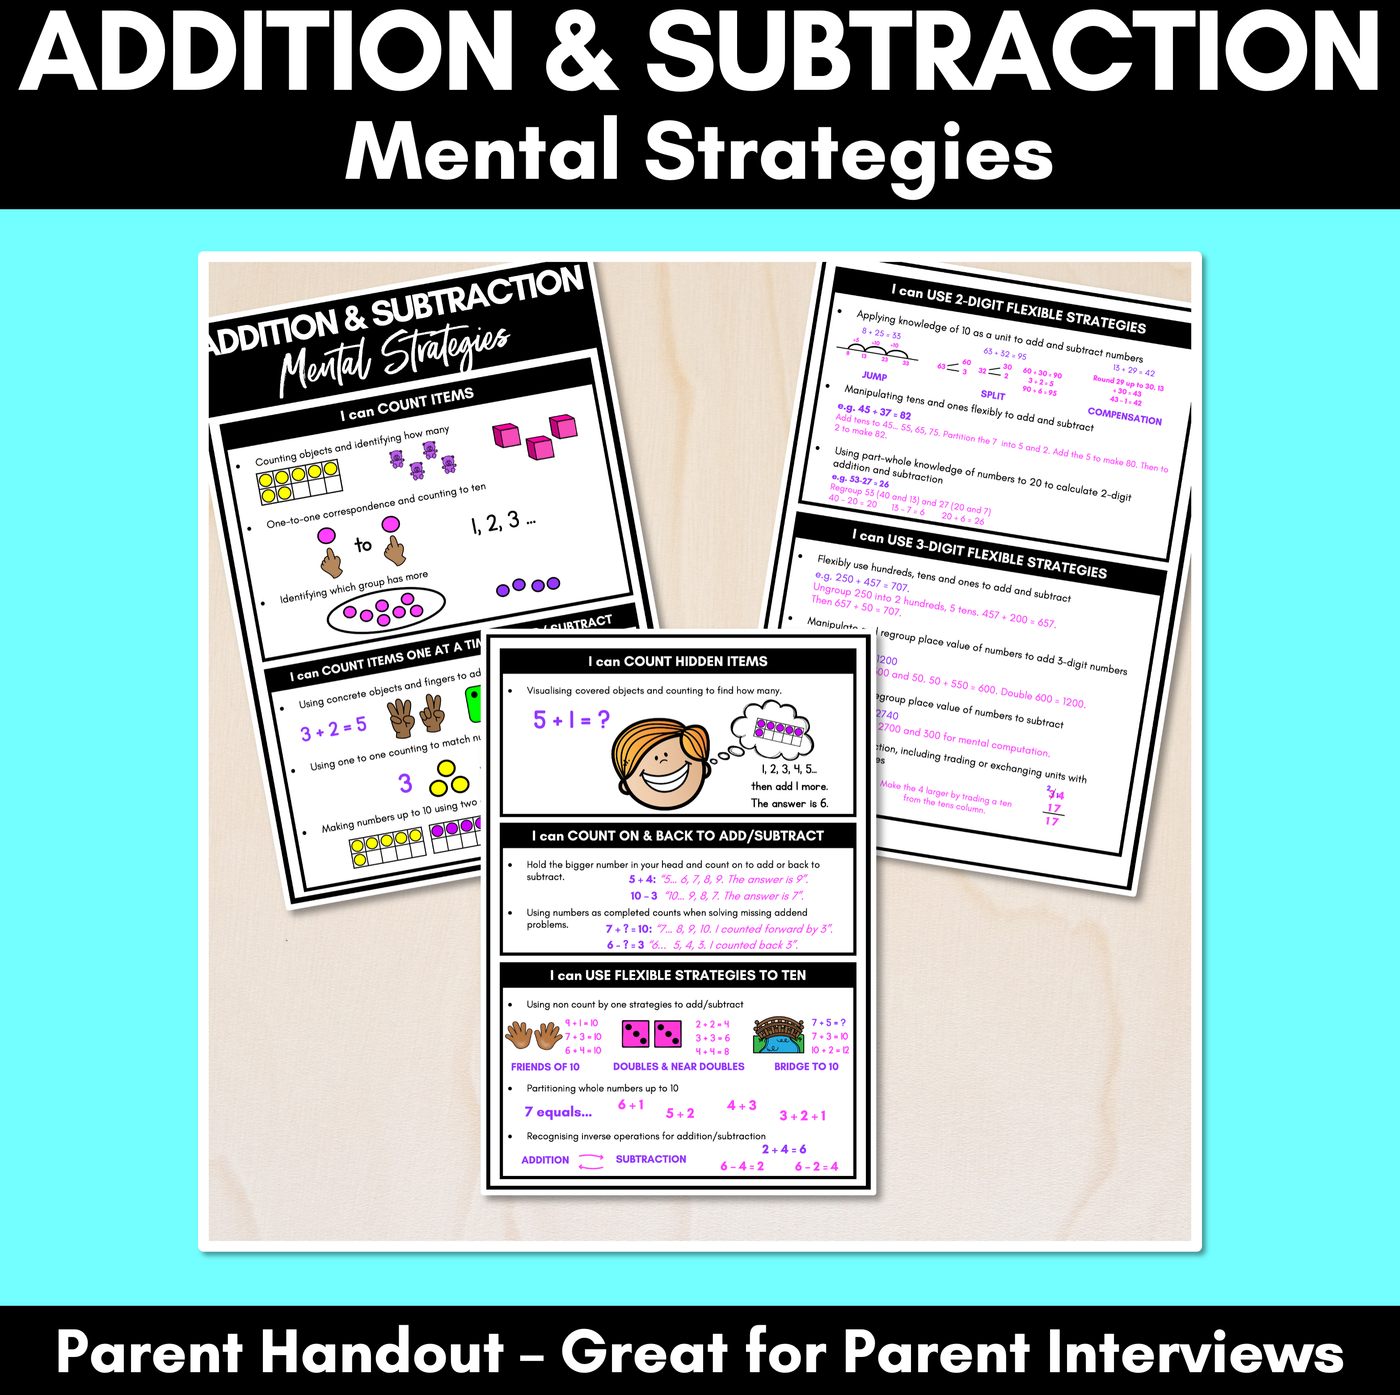 Mental Addition and Subtraction Strategies Overview